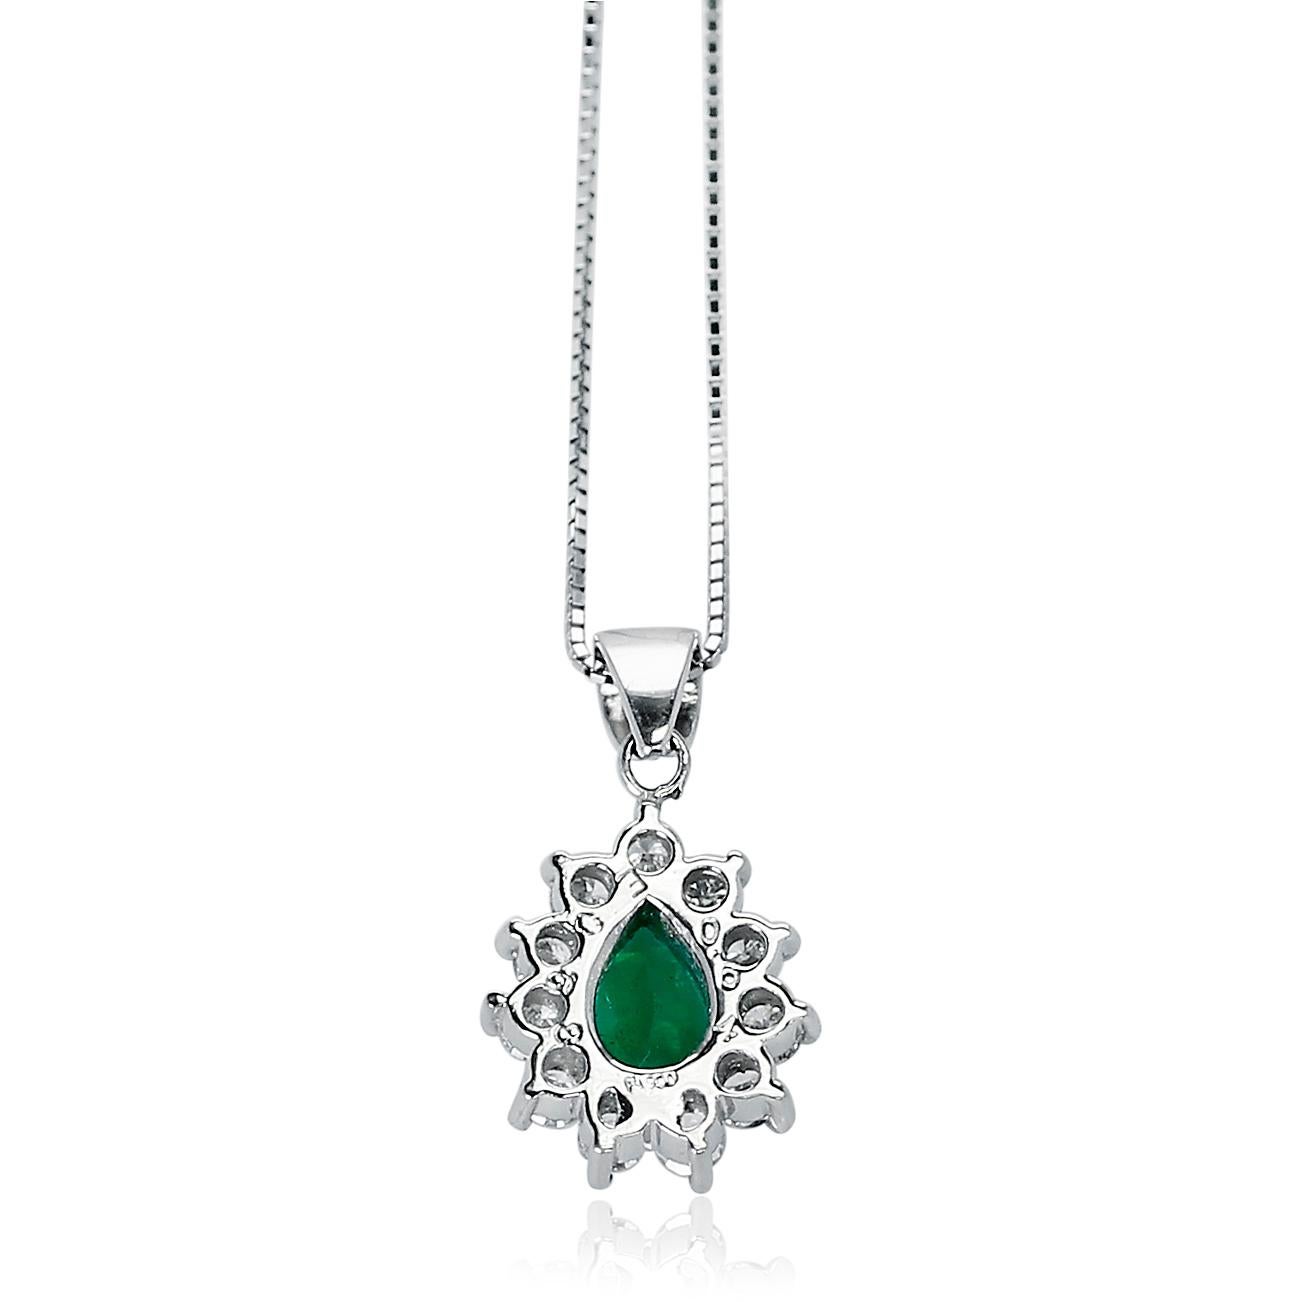 0.68 Ct Pear-Shape Emerald and 0.64 Ct Diamonds Pendant Necklace, Platinum In Excellent Condition For Sale In New York, NY